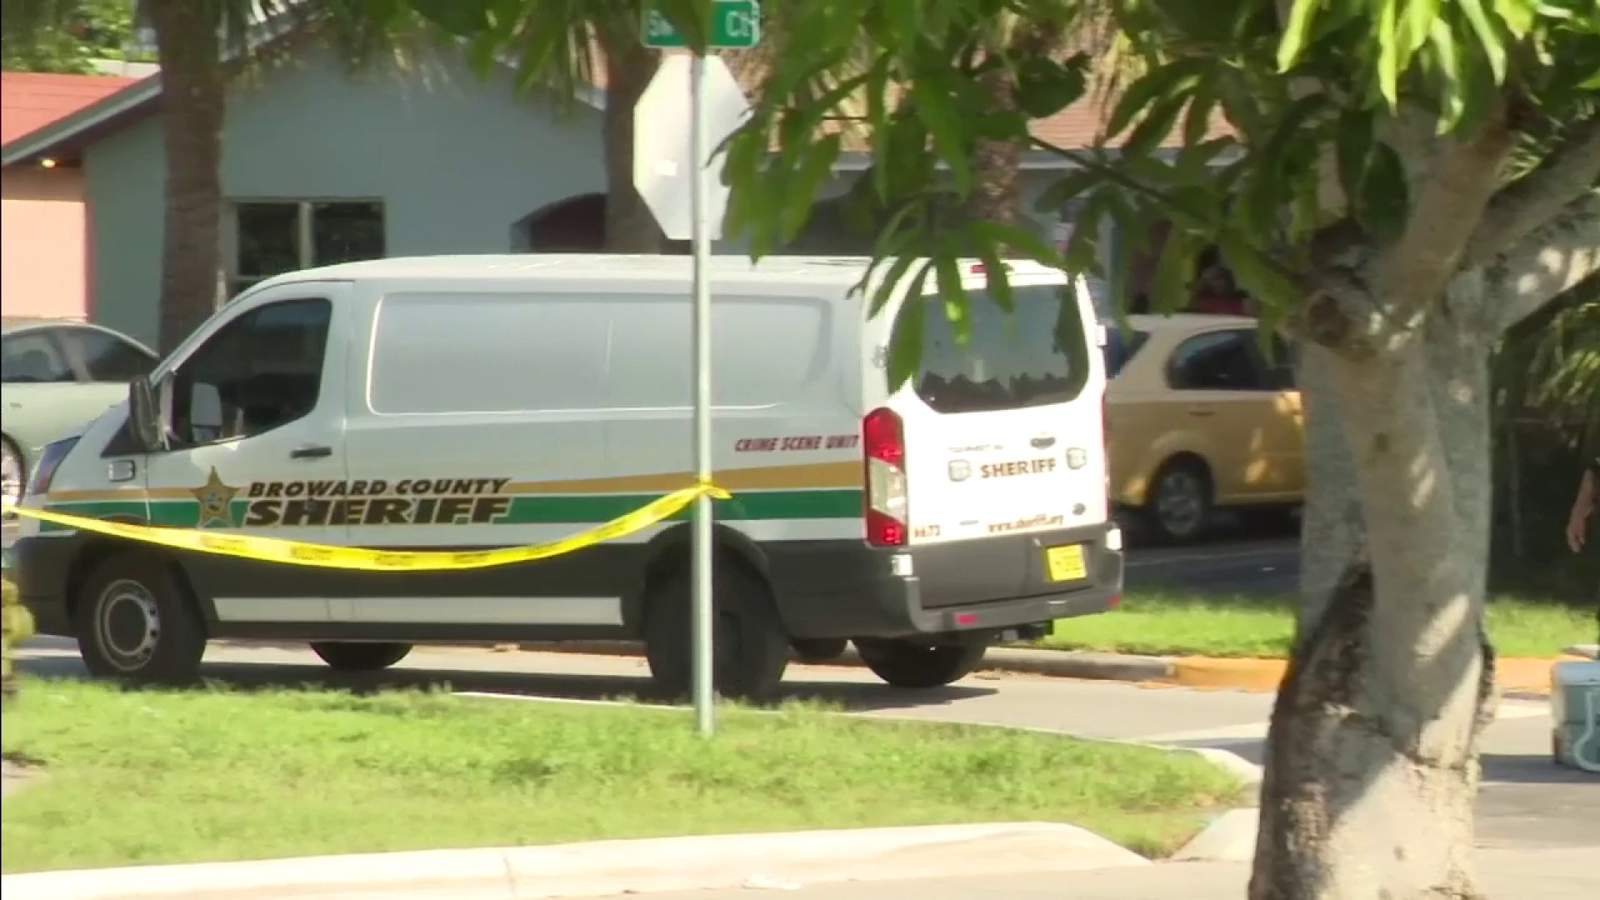 Police investigation continues after man injured in North Lauderdale shooting